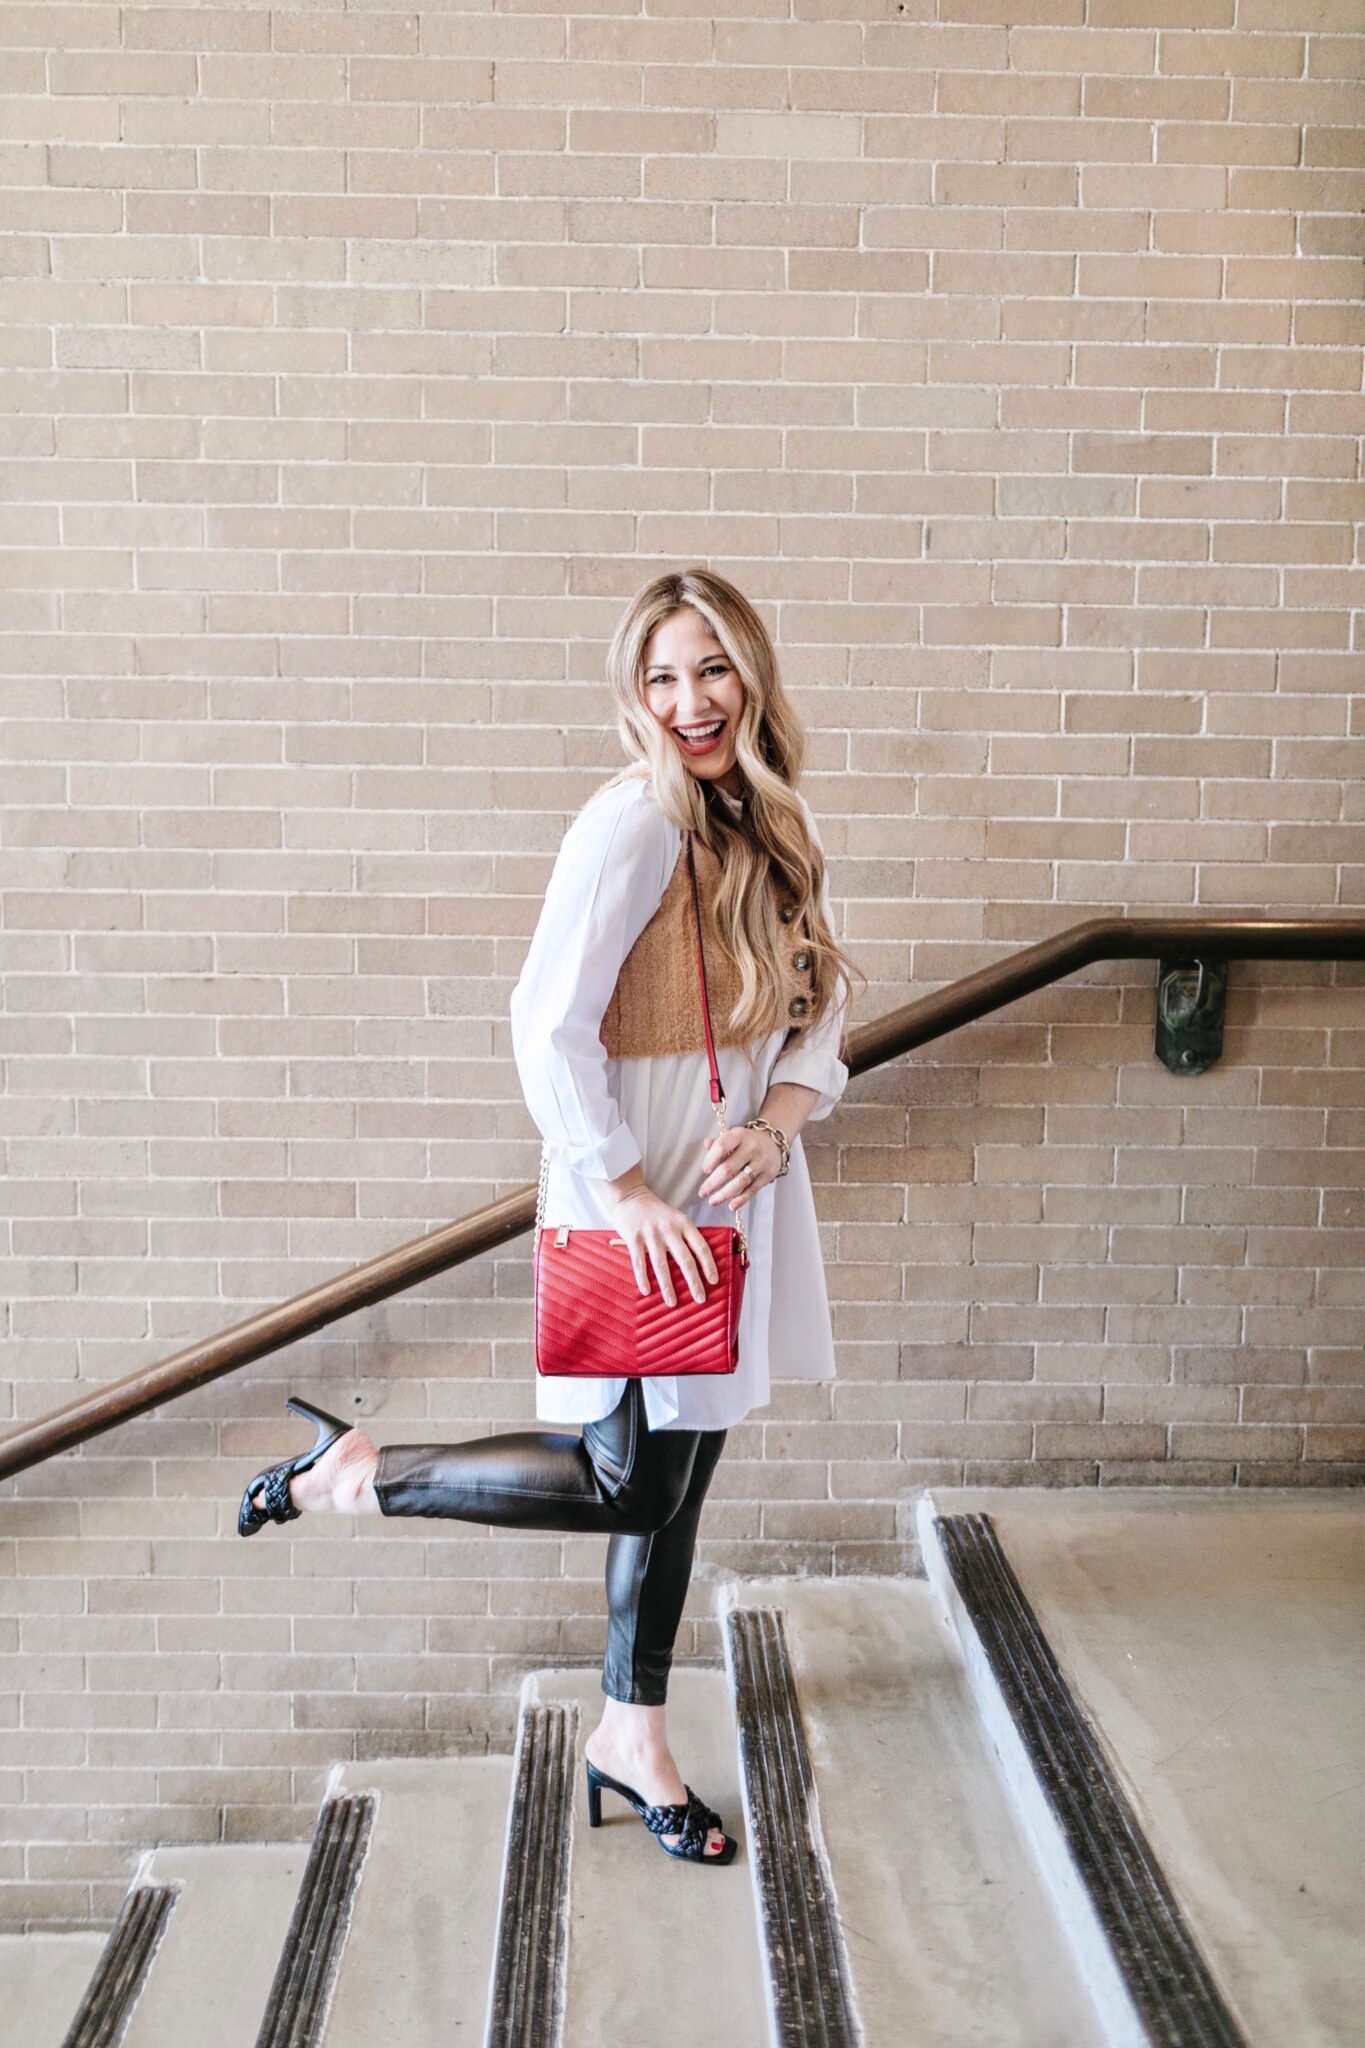 How to wear Leggings with Heels, tips featured by top US mom fashion blogger, Walking in Memphis in High Heels.